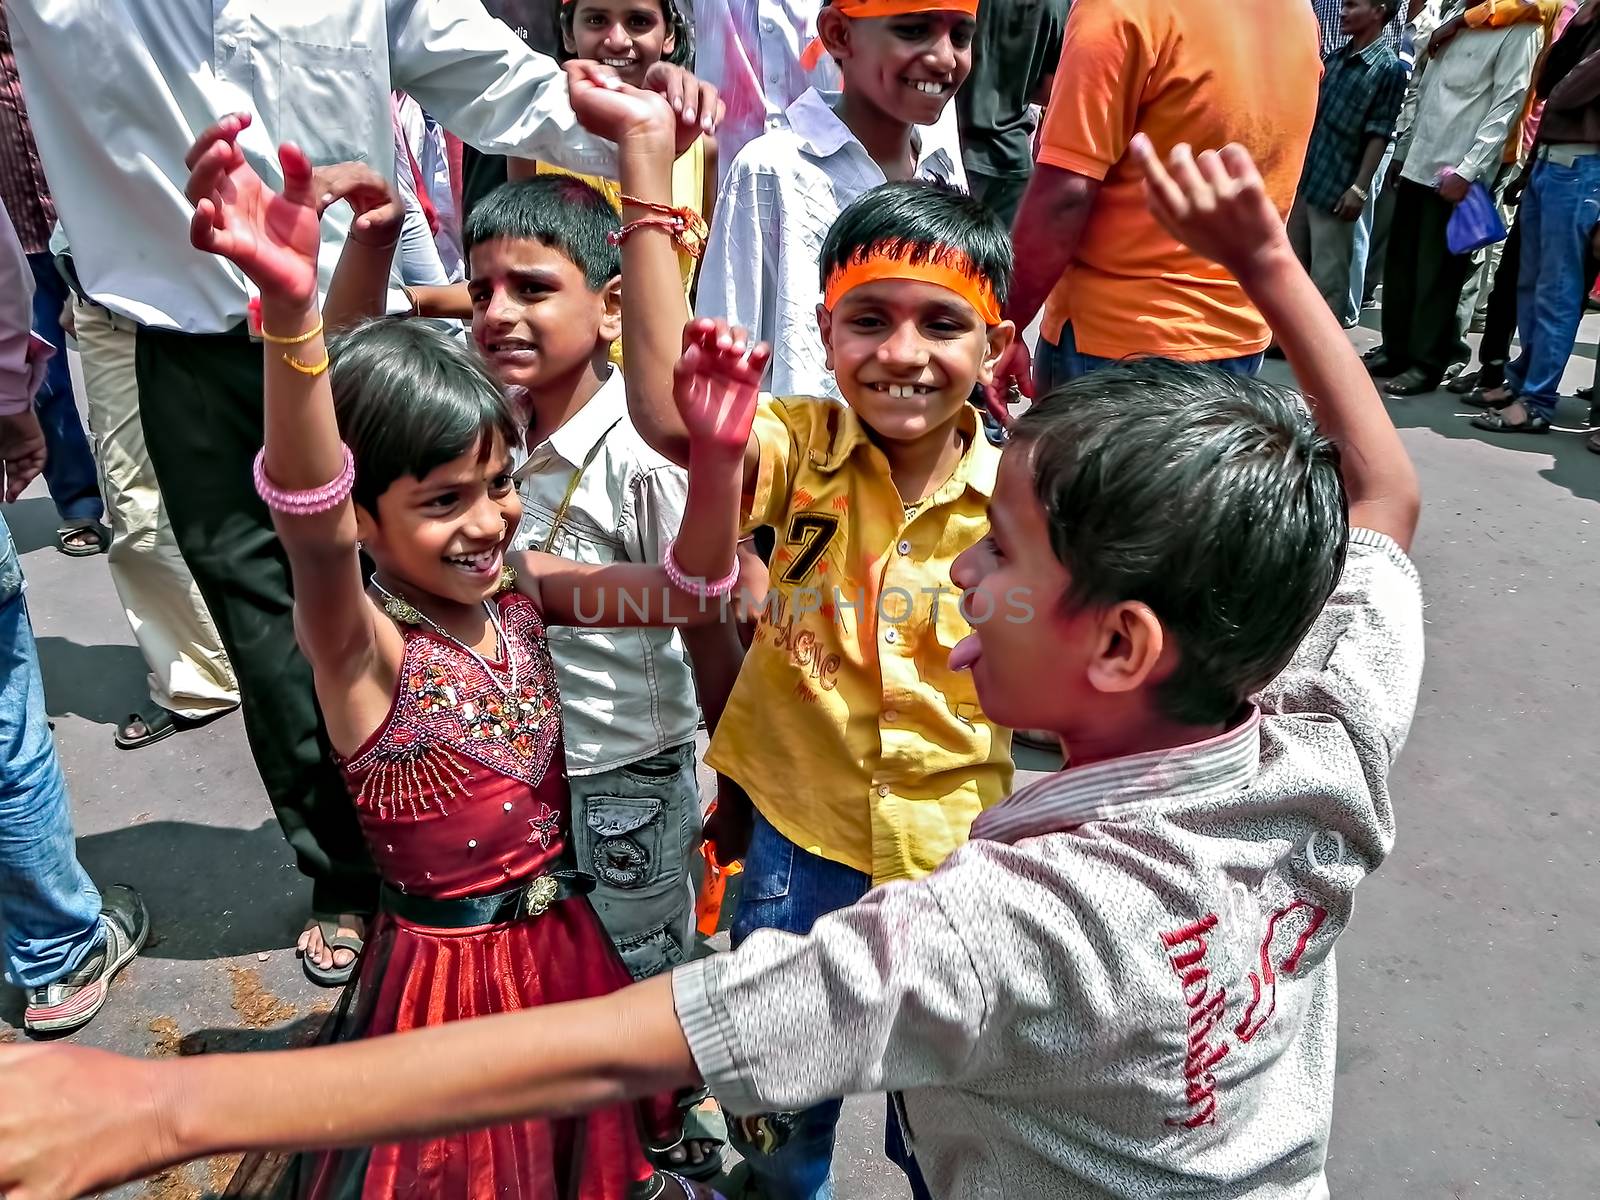 Pune,Maharashtra,India-September 22nd,2010: Children dancing in front of ganesh idol during festival procession.